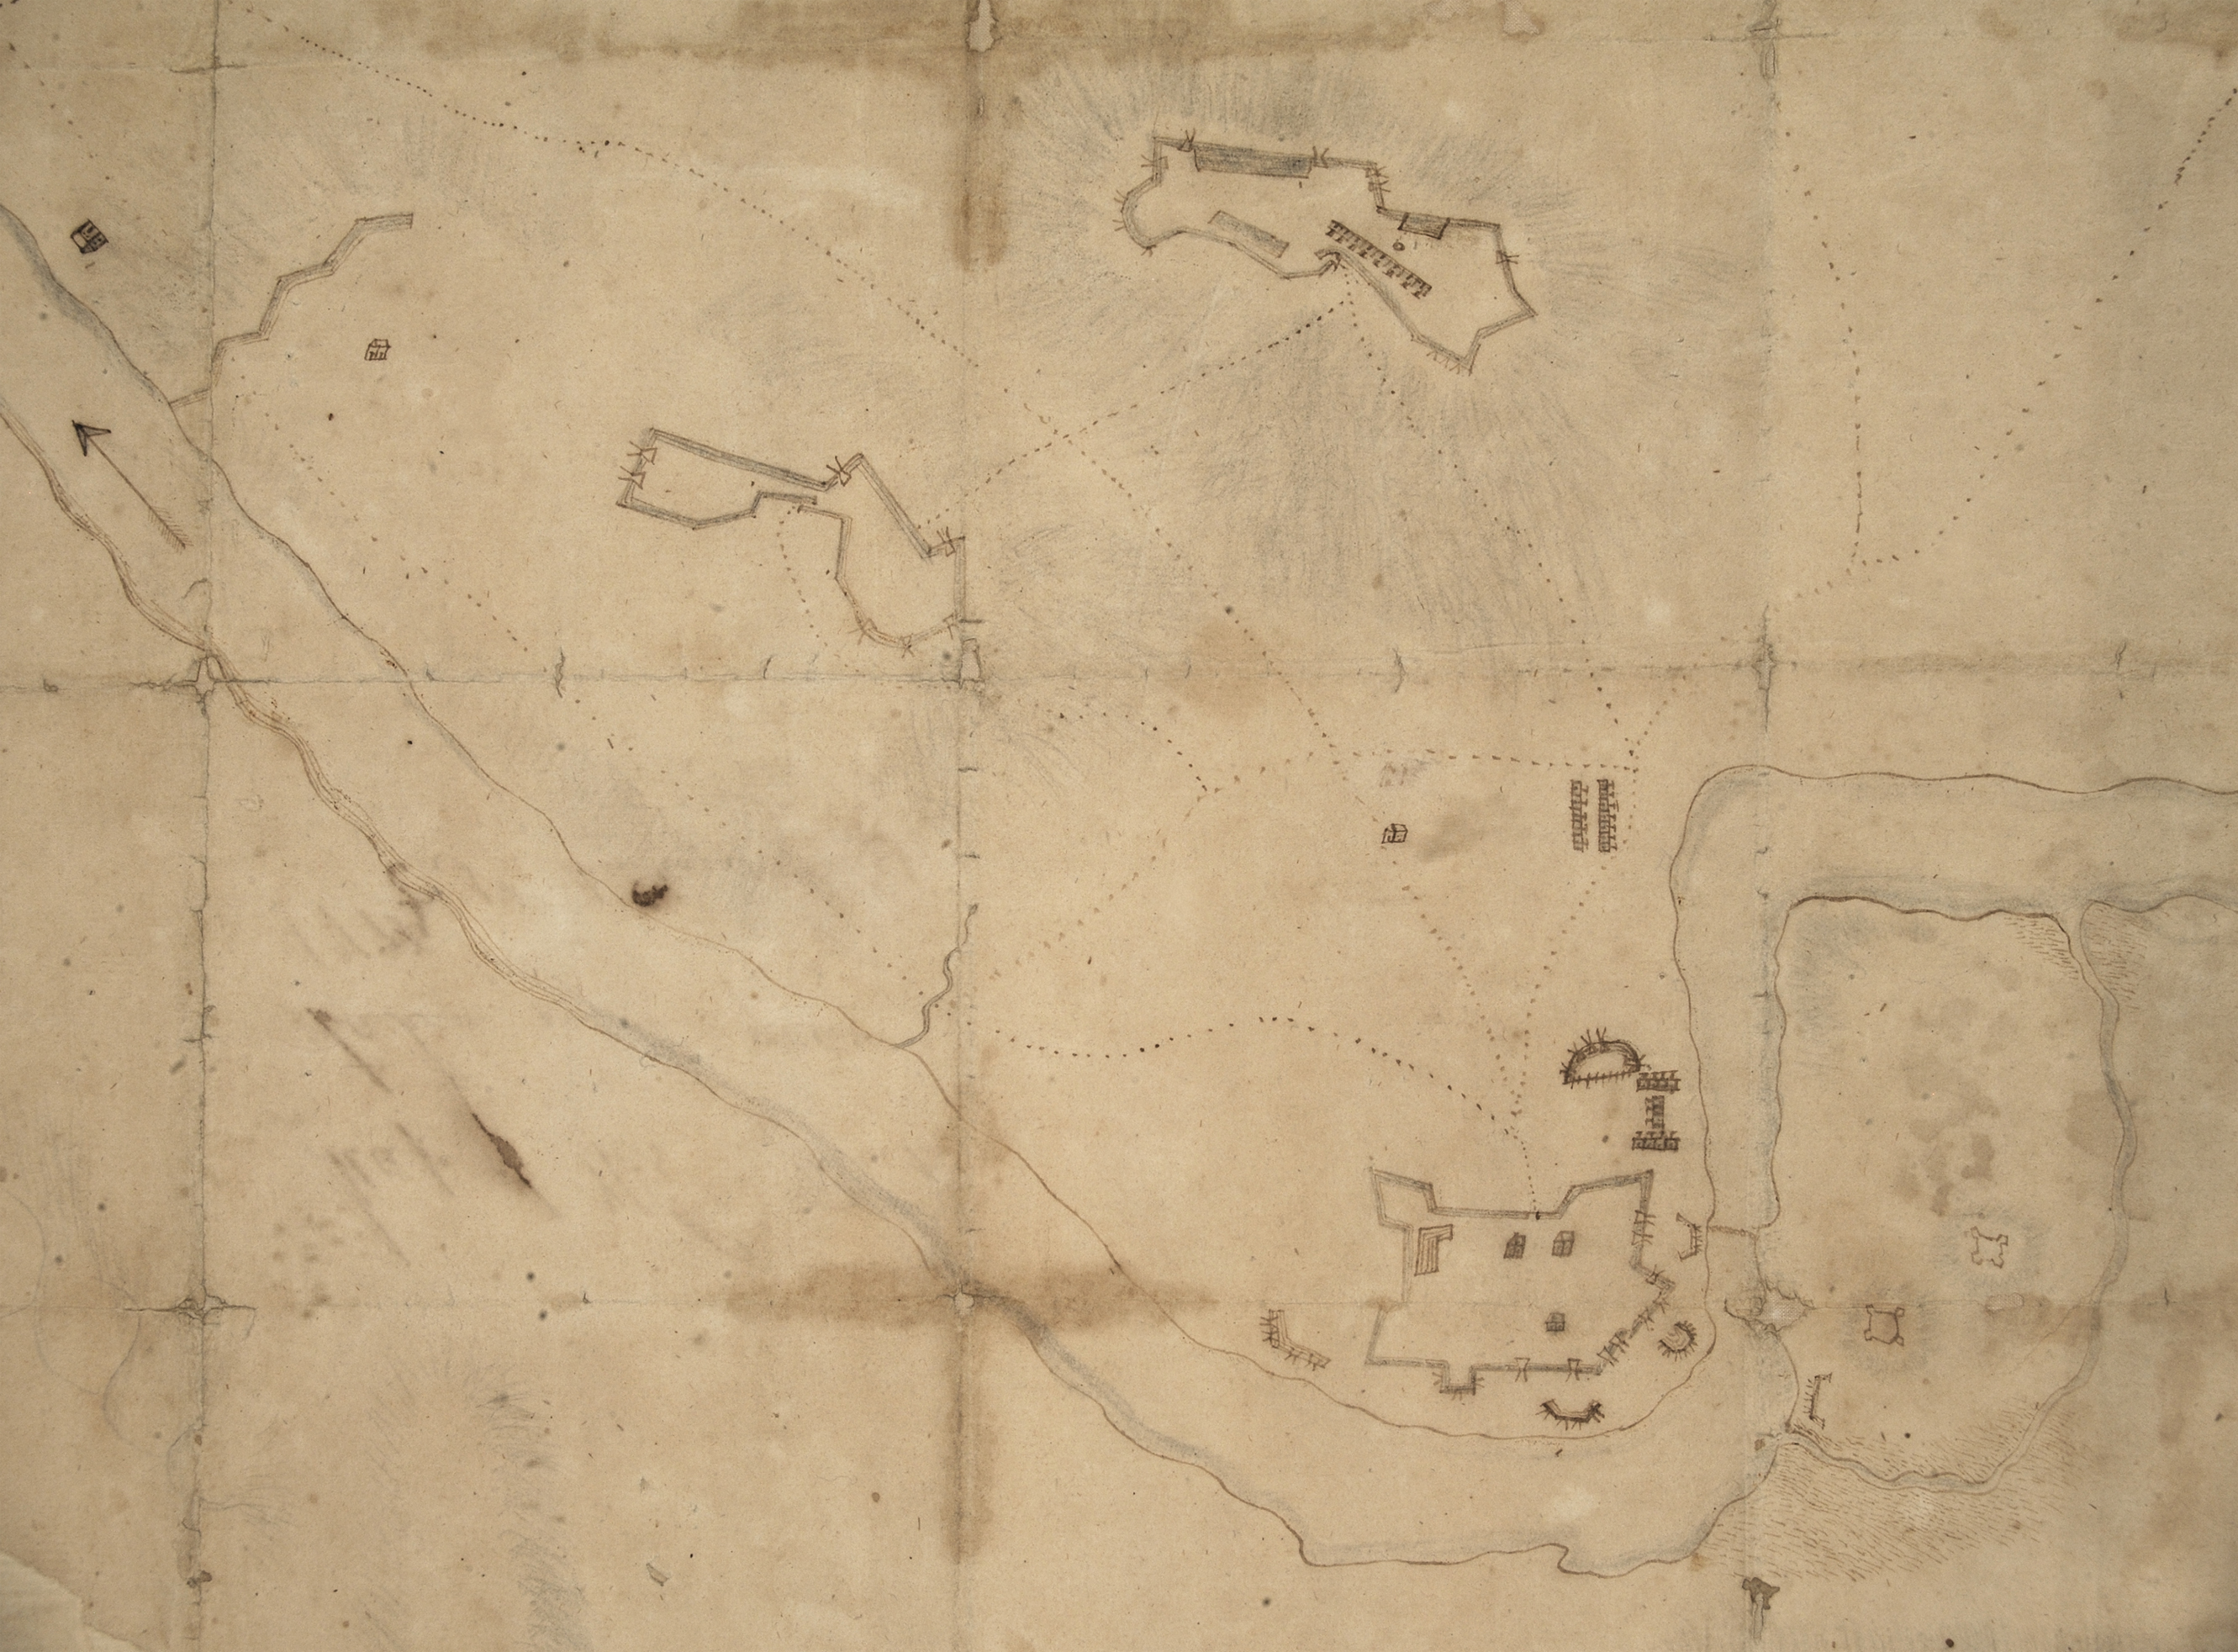 Manuscript map of West Point attributed to Capt. Andrew Engle, ca. 1779